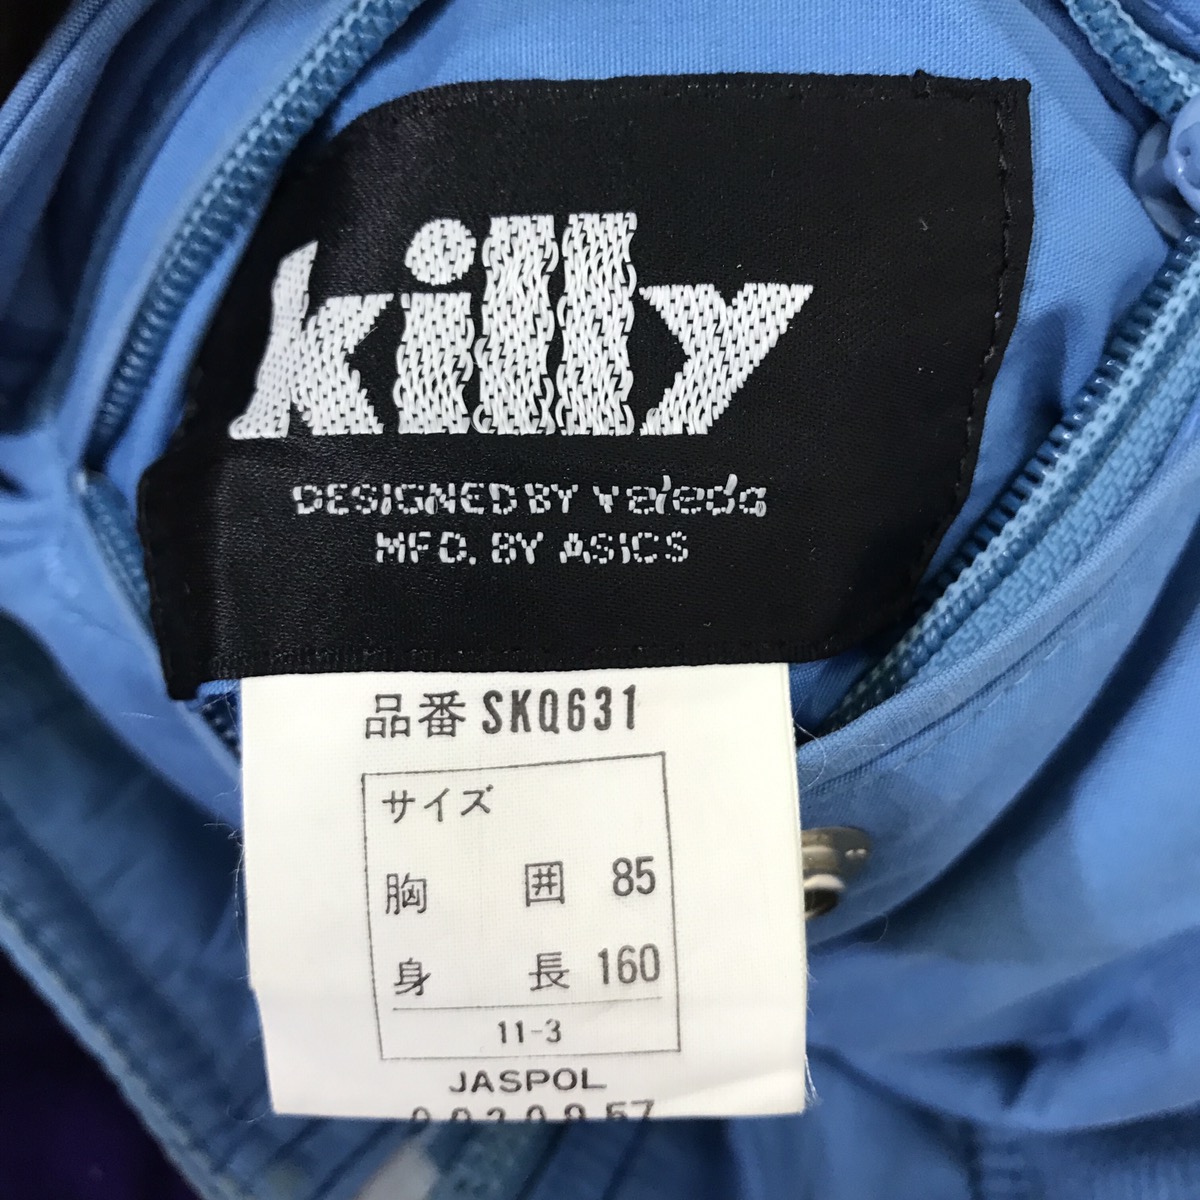 Made In Japan Vintage Killy Colorblock Ski Jacket by Asics - 5